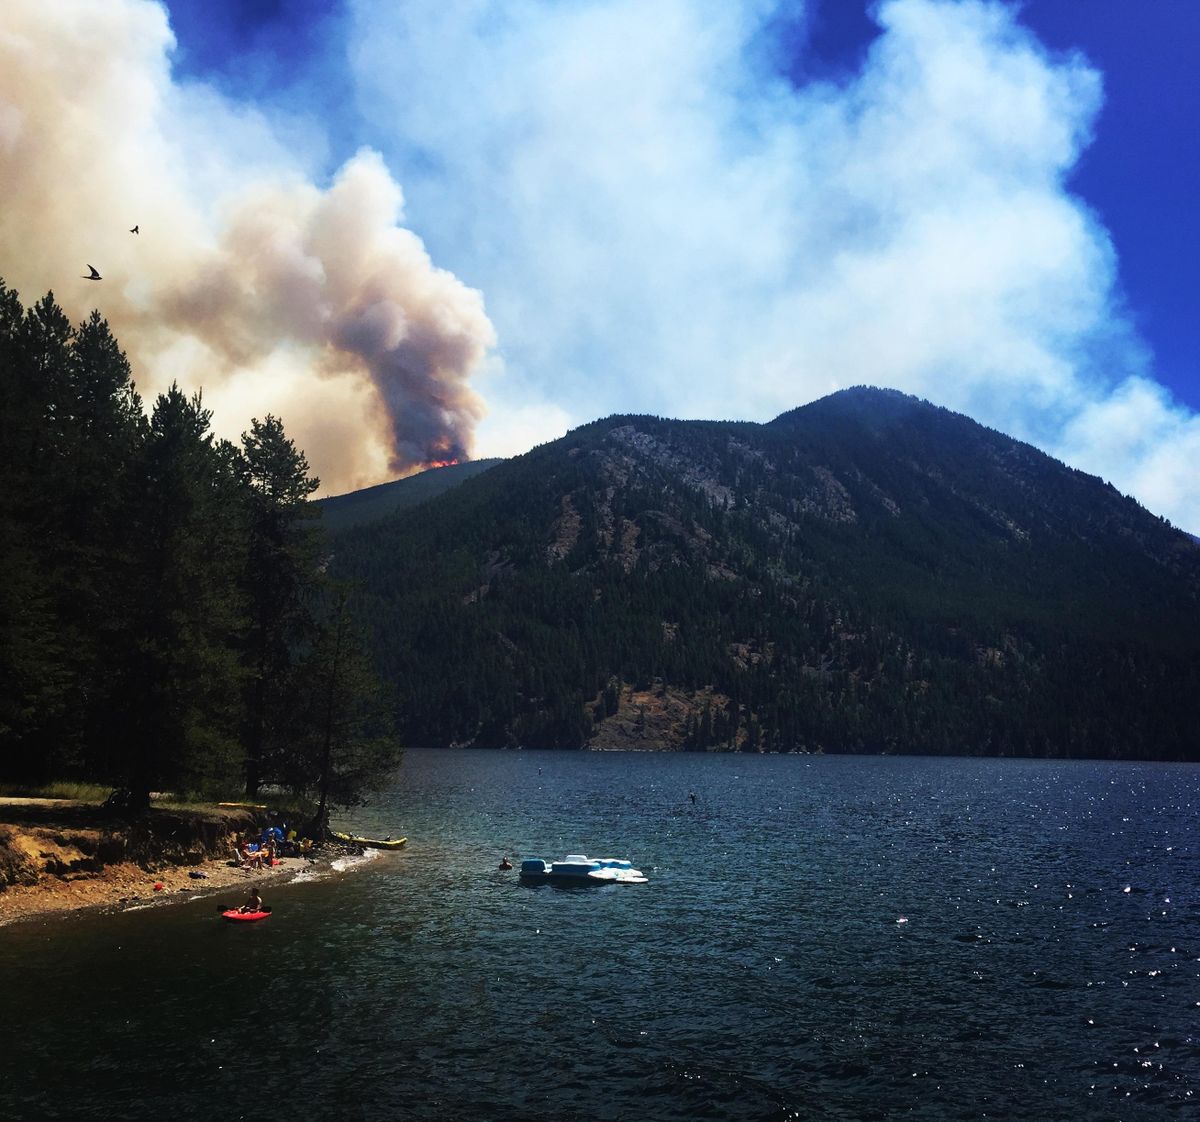 Sullivan Lake remains open but officials urged those recreating on the lake to use caution and not approach anywhere where smoke is emanating. (Courtesy of the Department of Natural Resources)